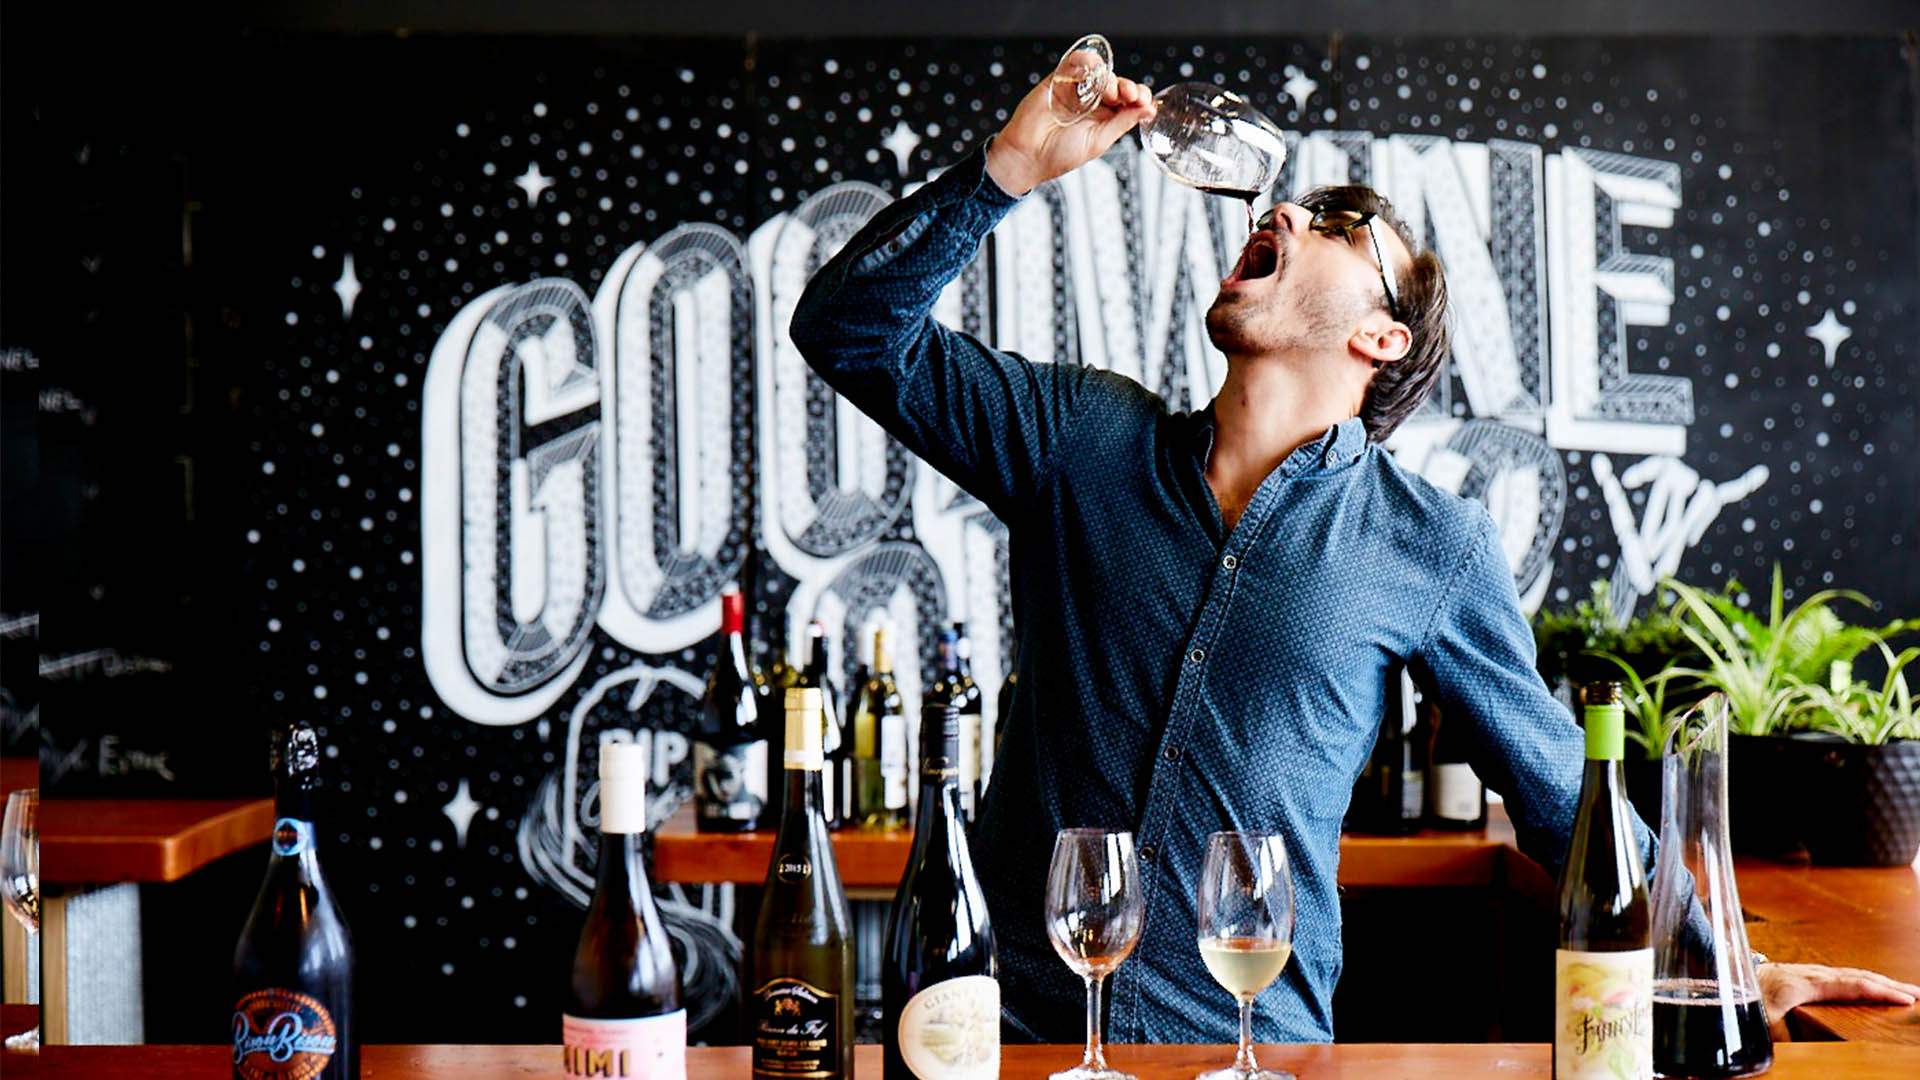 How to Shop For Wine Like a Sommelier